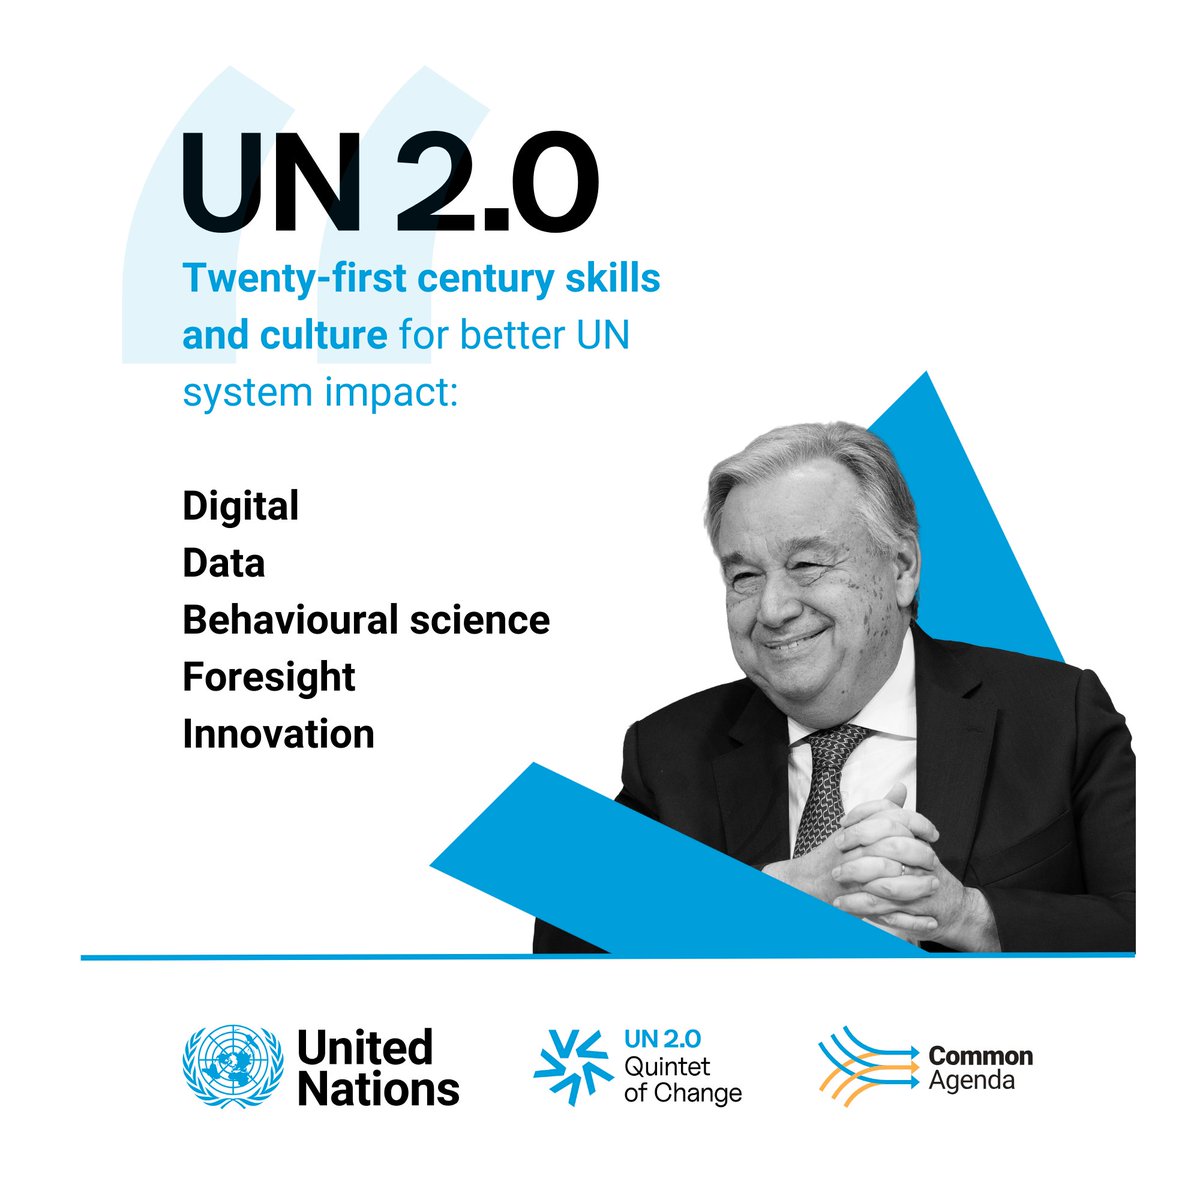 The UN Secretary-General has shared a policy brief on 'UN 2.0' - highlighting the importance of BeSci! The UN 2.0 'Quintet of Change' encapsulates his vision of a modern UN - including BeSci, innovation, data, digital & foresight Find out more here! un-two-zero.network